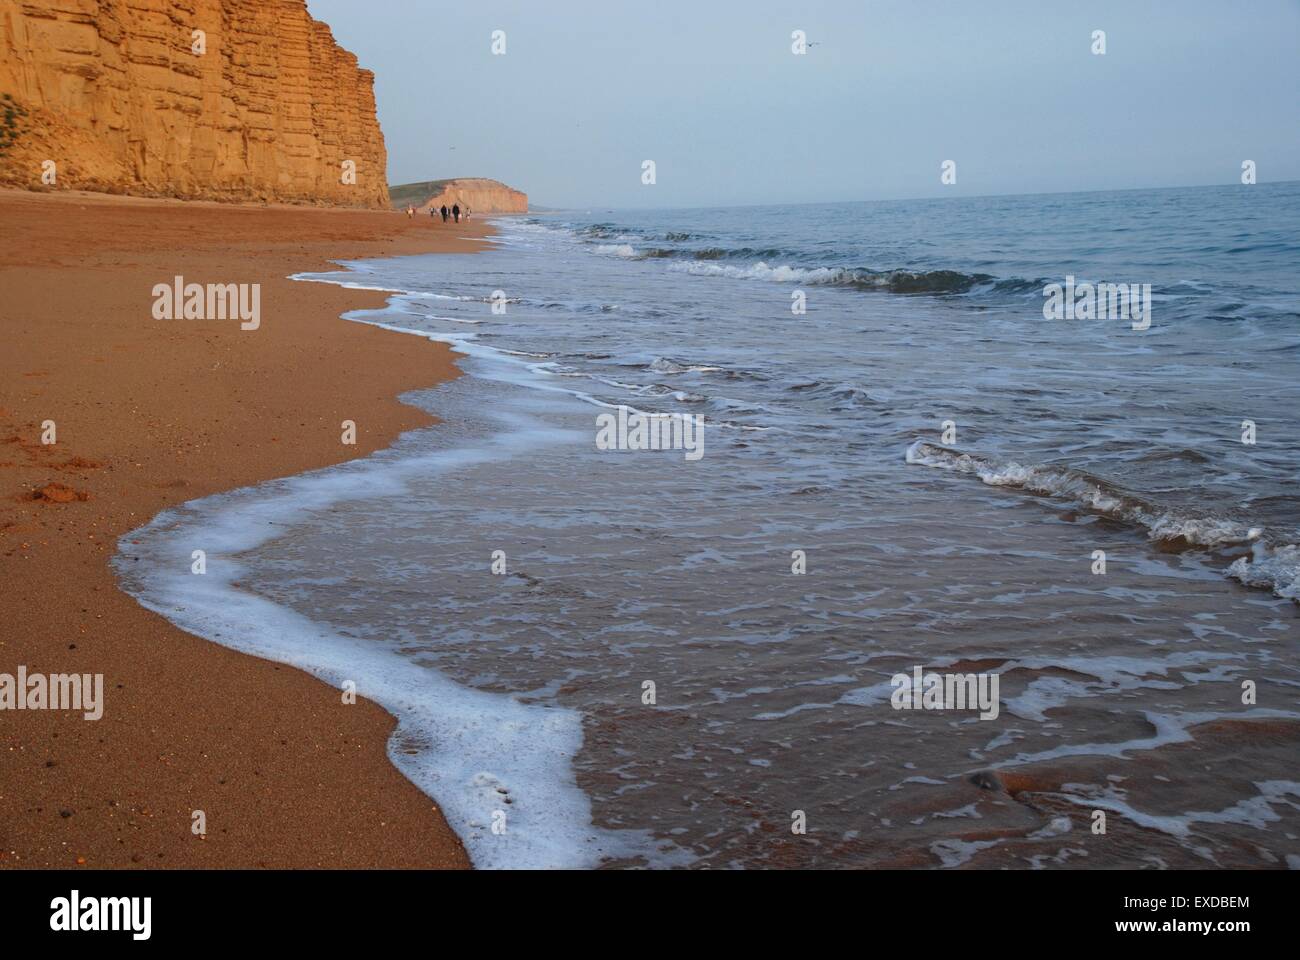 Waves gently lapping the beach under the sandstone cliffs of West Bay, Dorset, UK Stock Photo